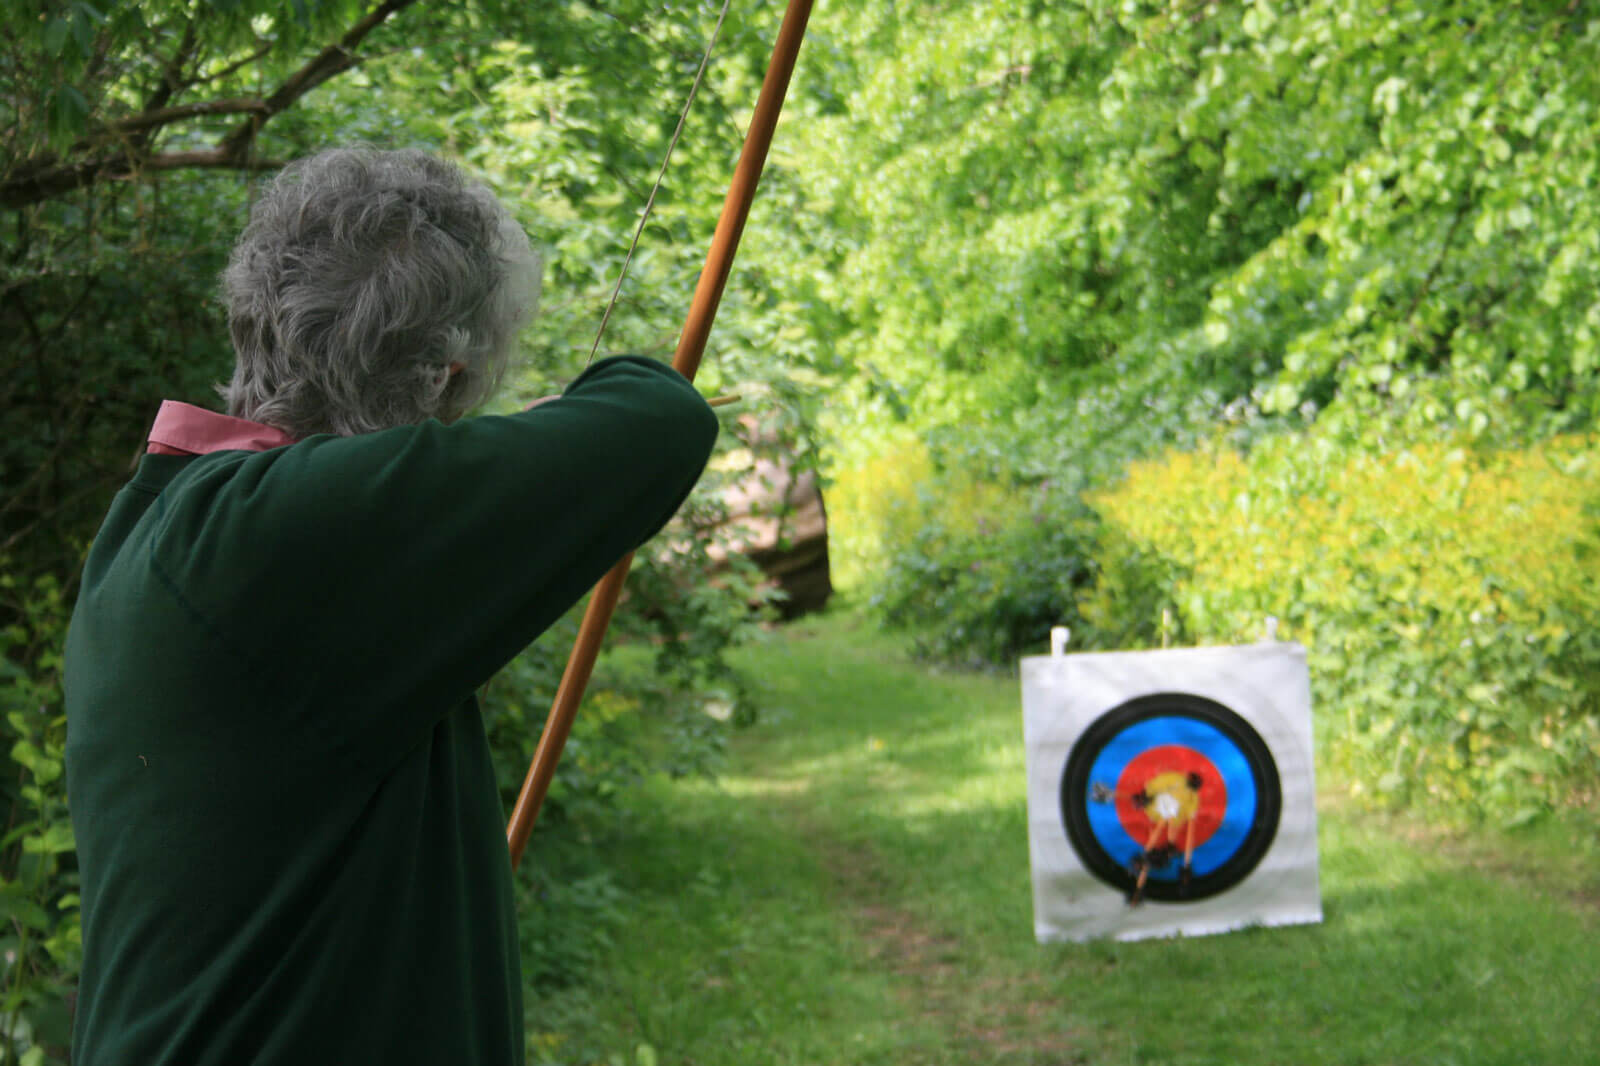 What Type of Archery Target Should I Use At Home?